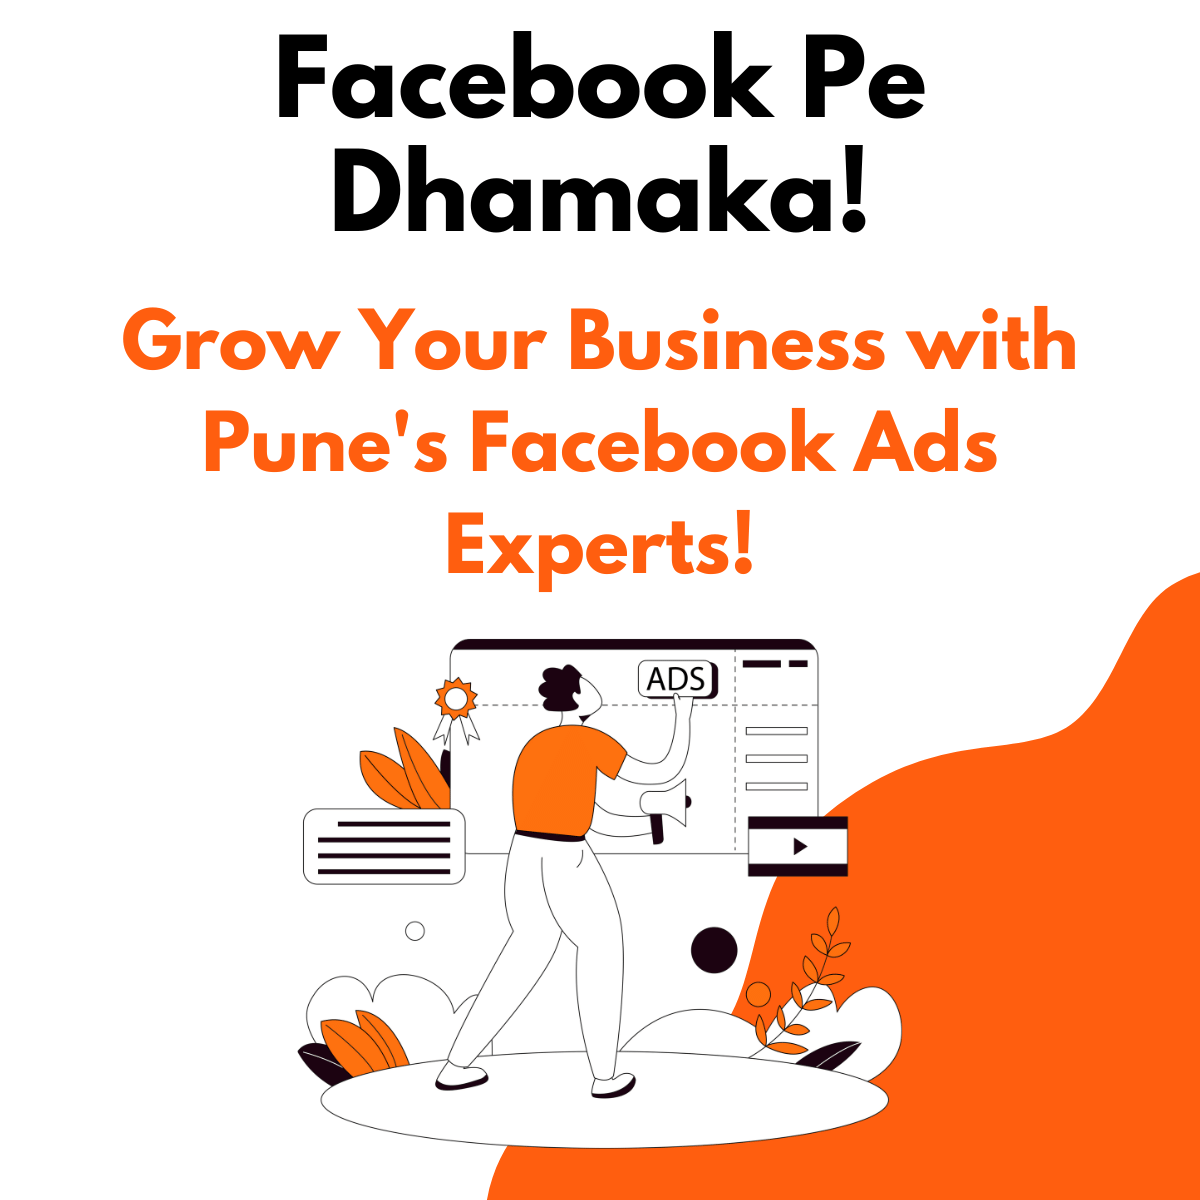 Grow Your Business with Pune's Facebook Ads Experts!